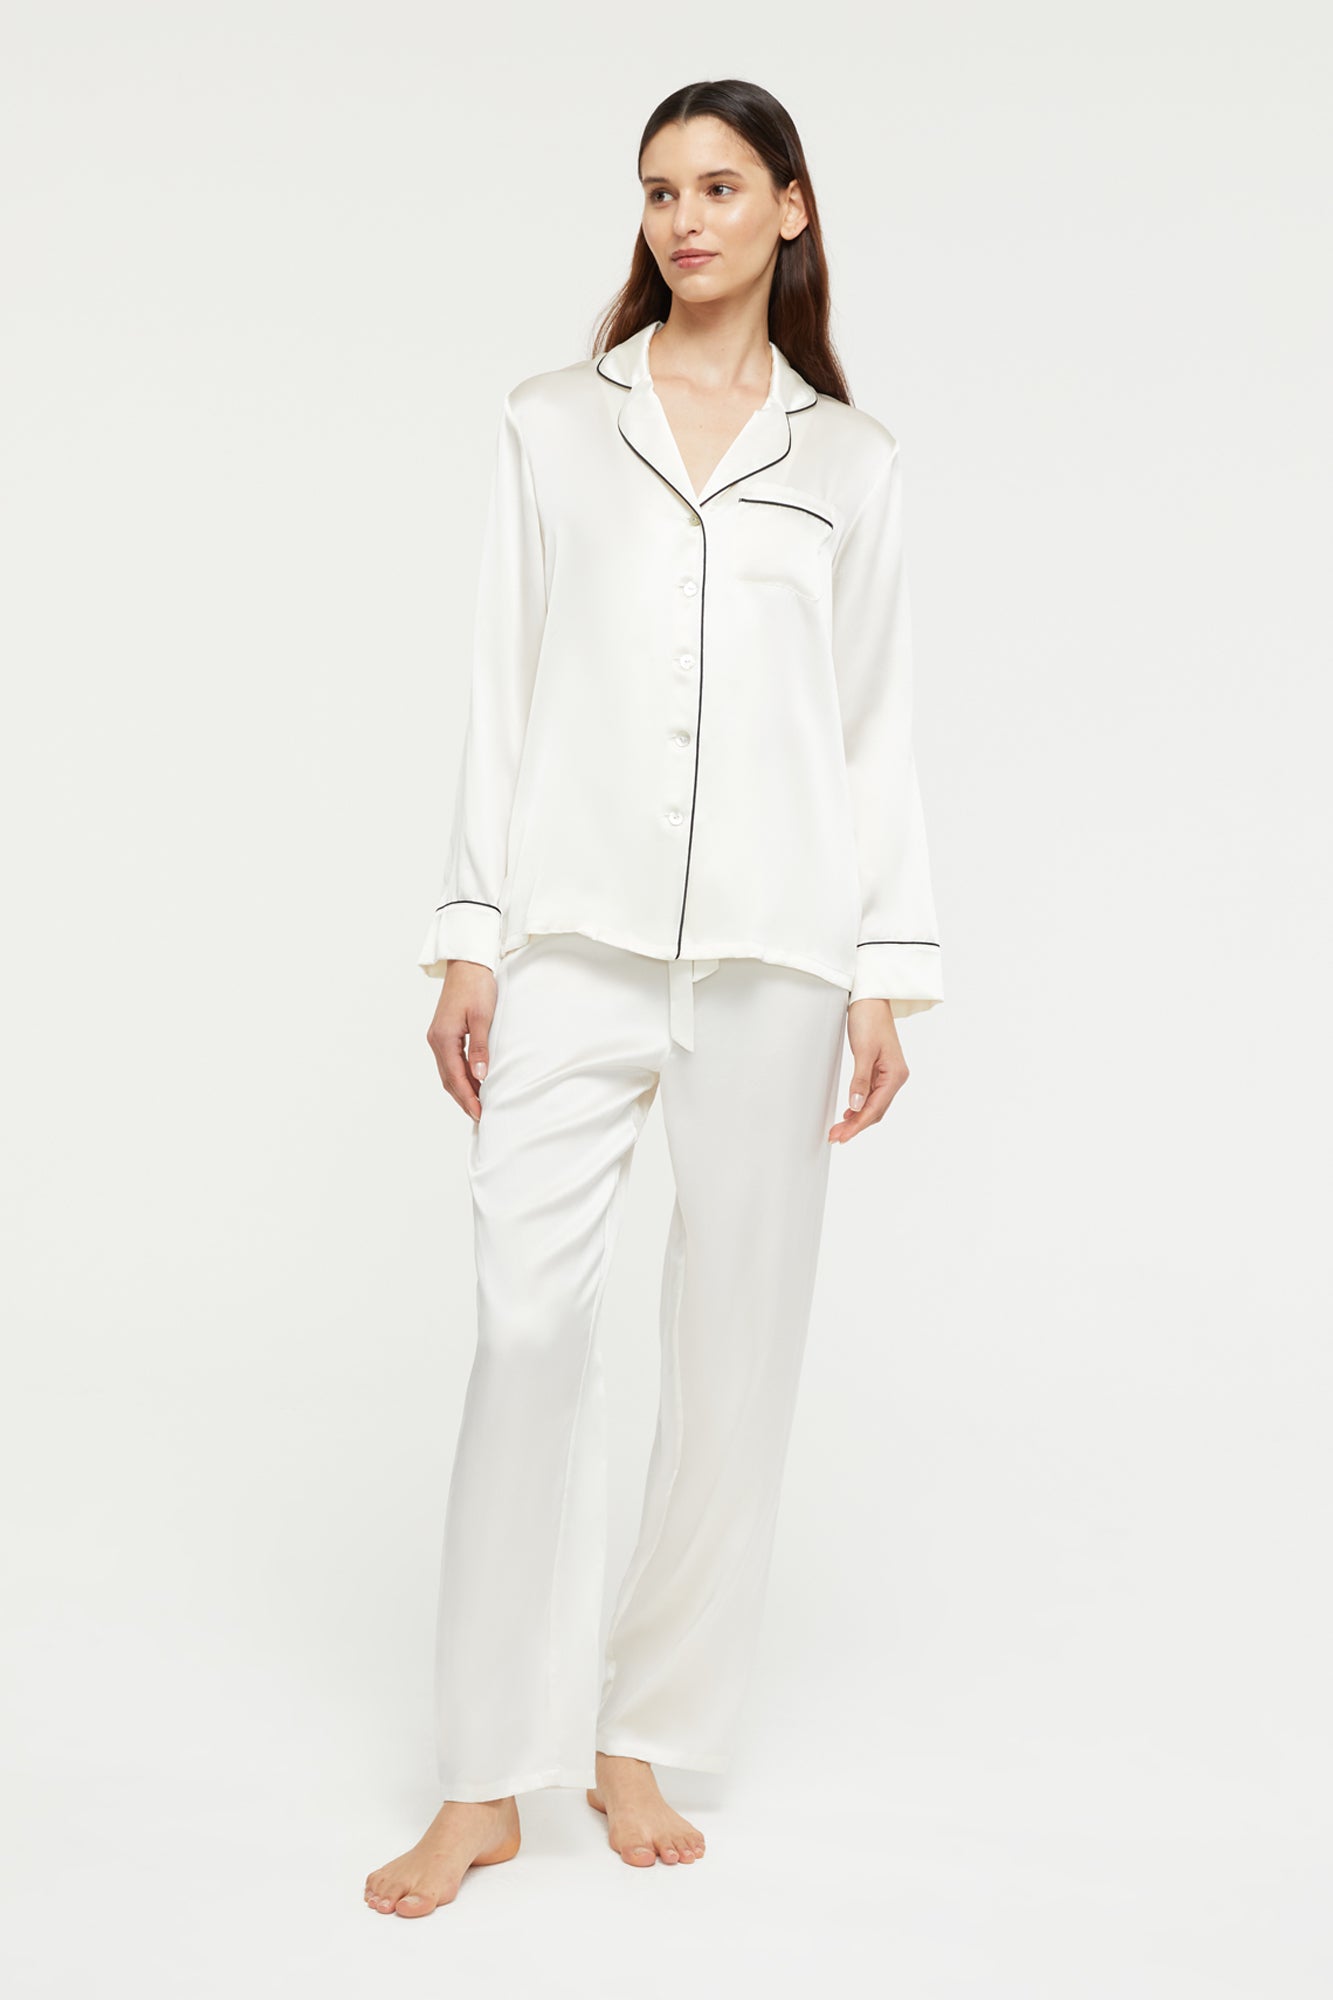 The Fine Finishes Pyjama in Creme is a Ginia Sleepwear signature piece and part of our Silk Basics collection.